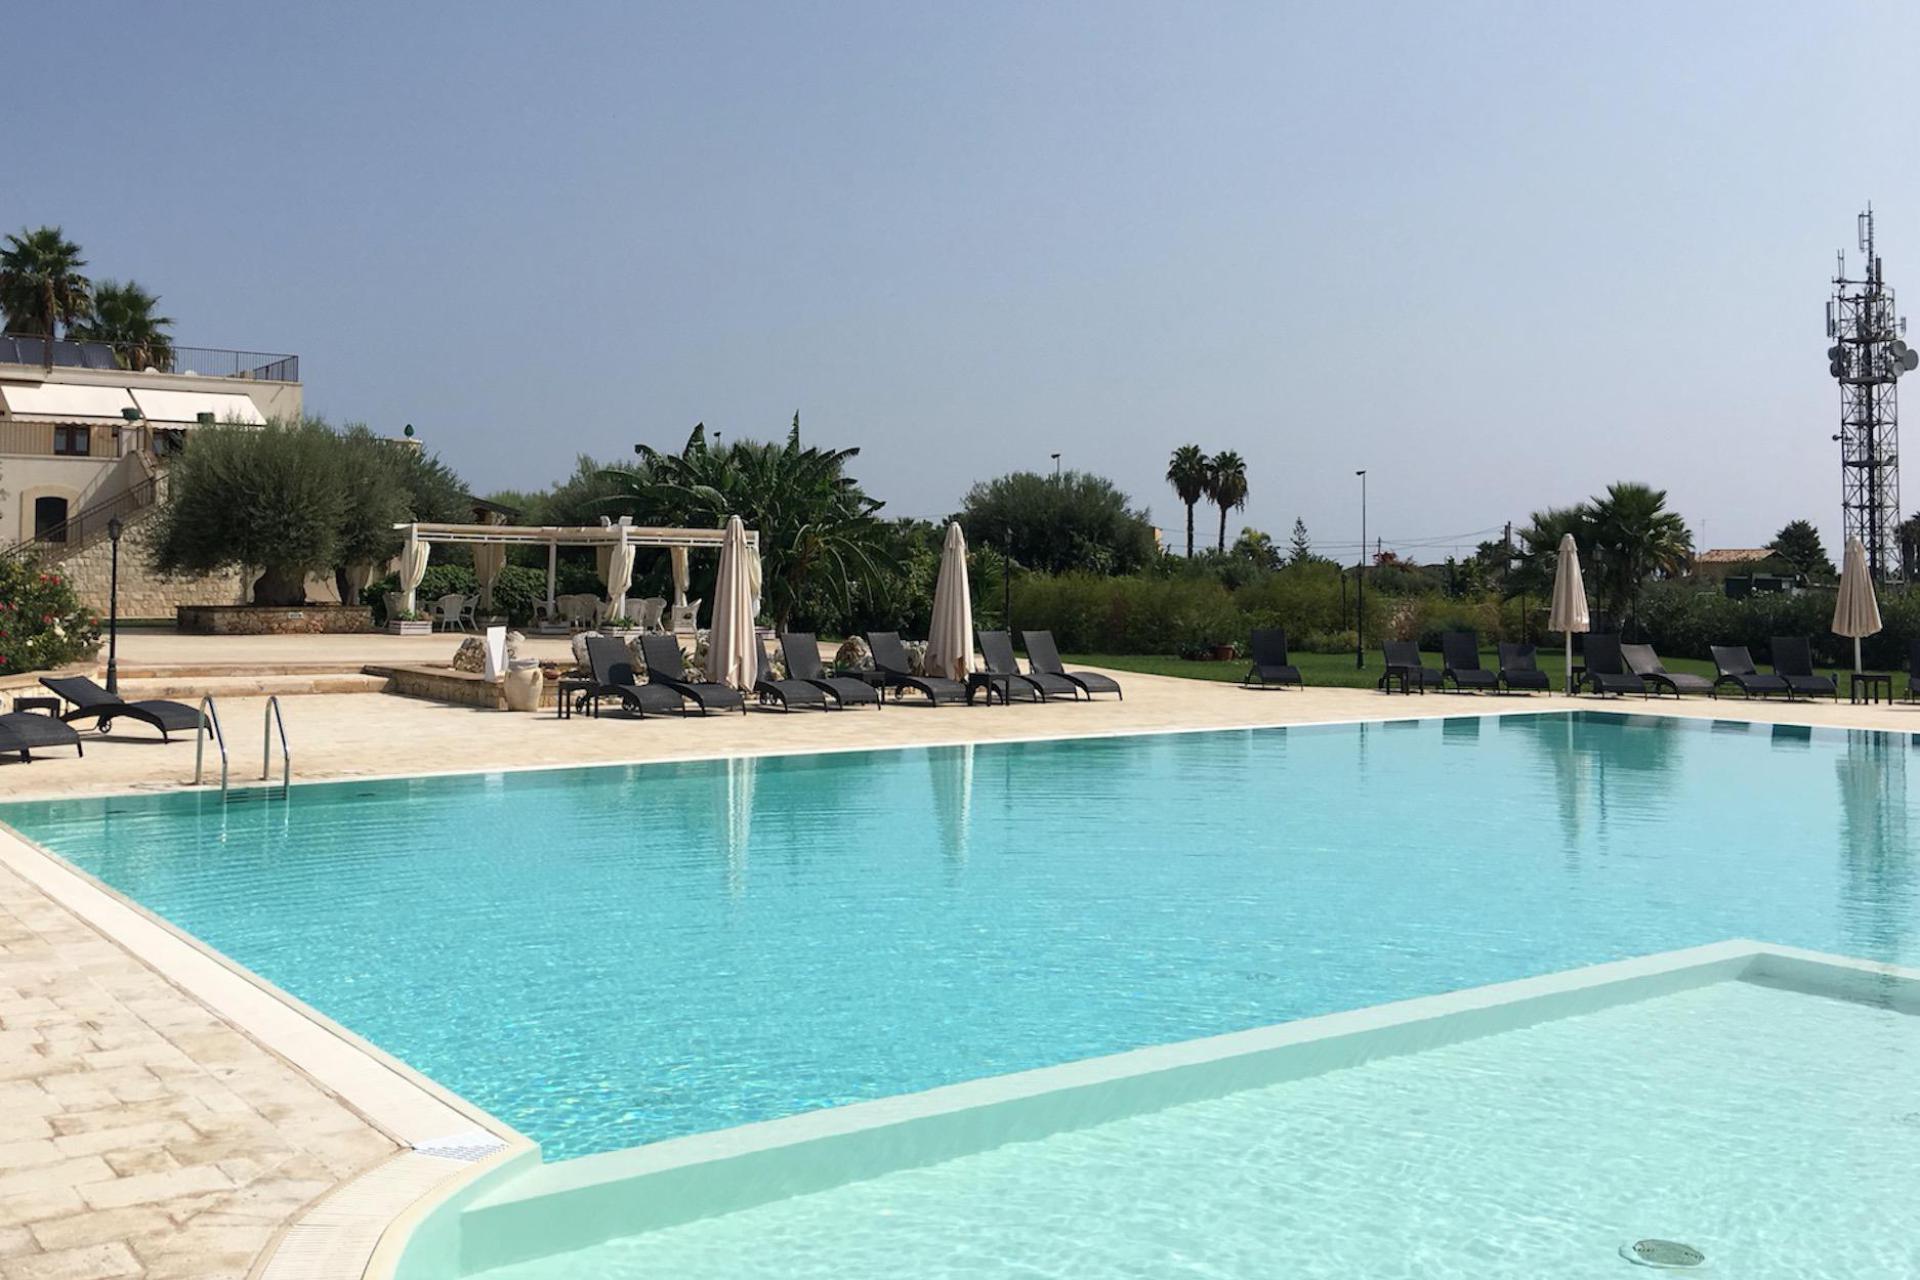 Agriturismo Sicily Agriturismo with large pool near beach